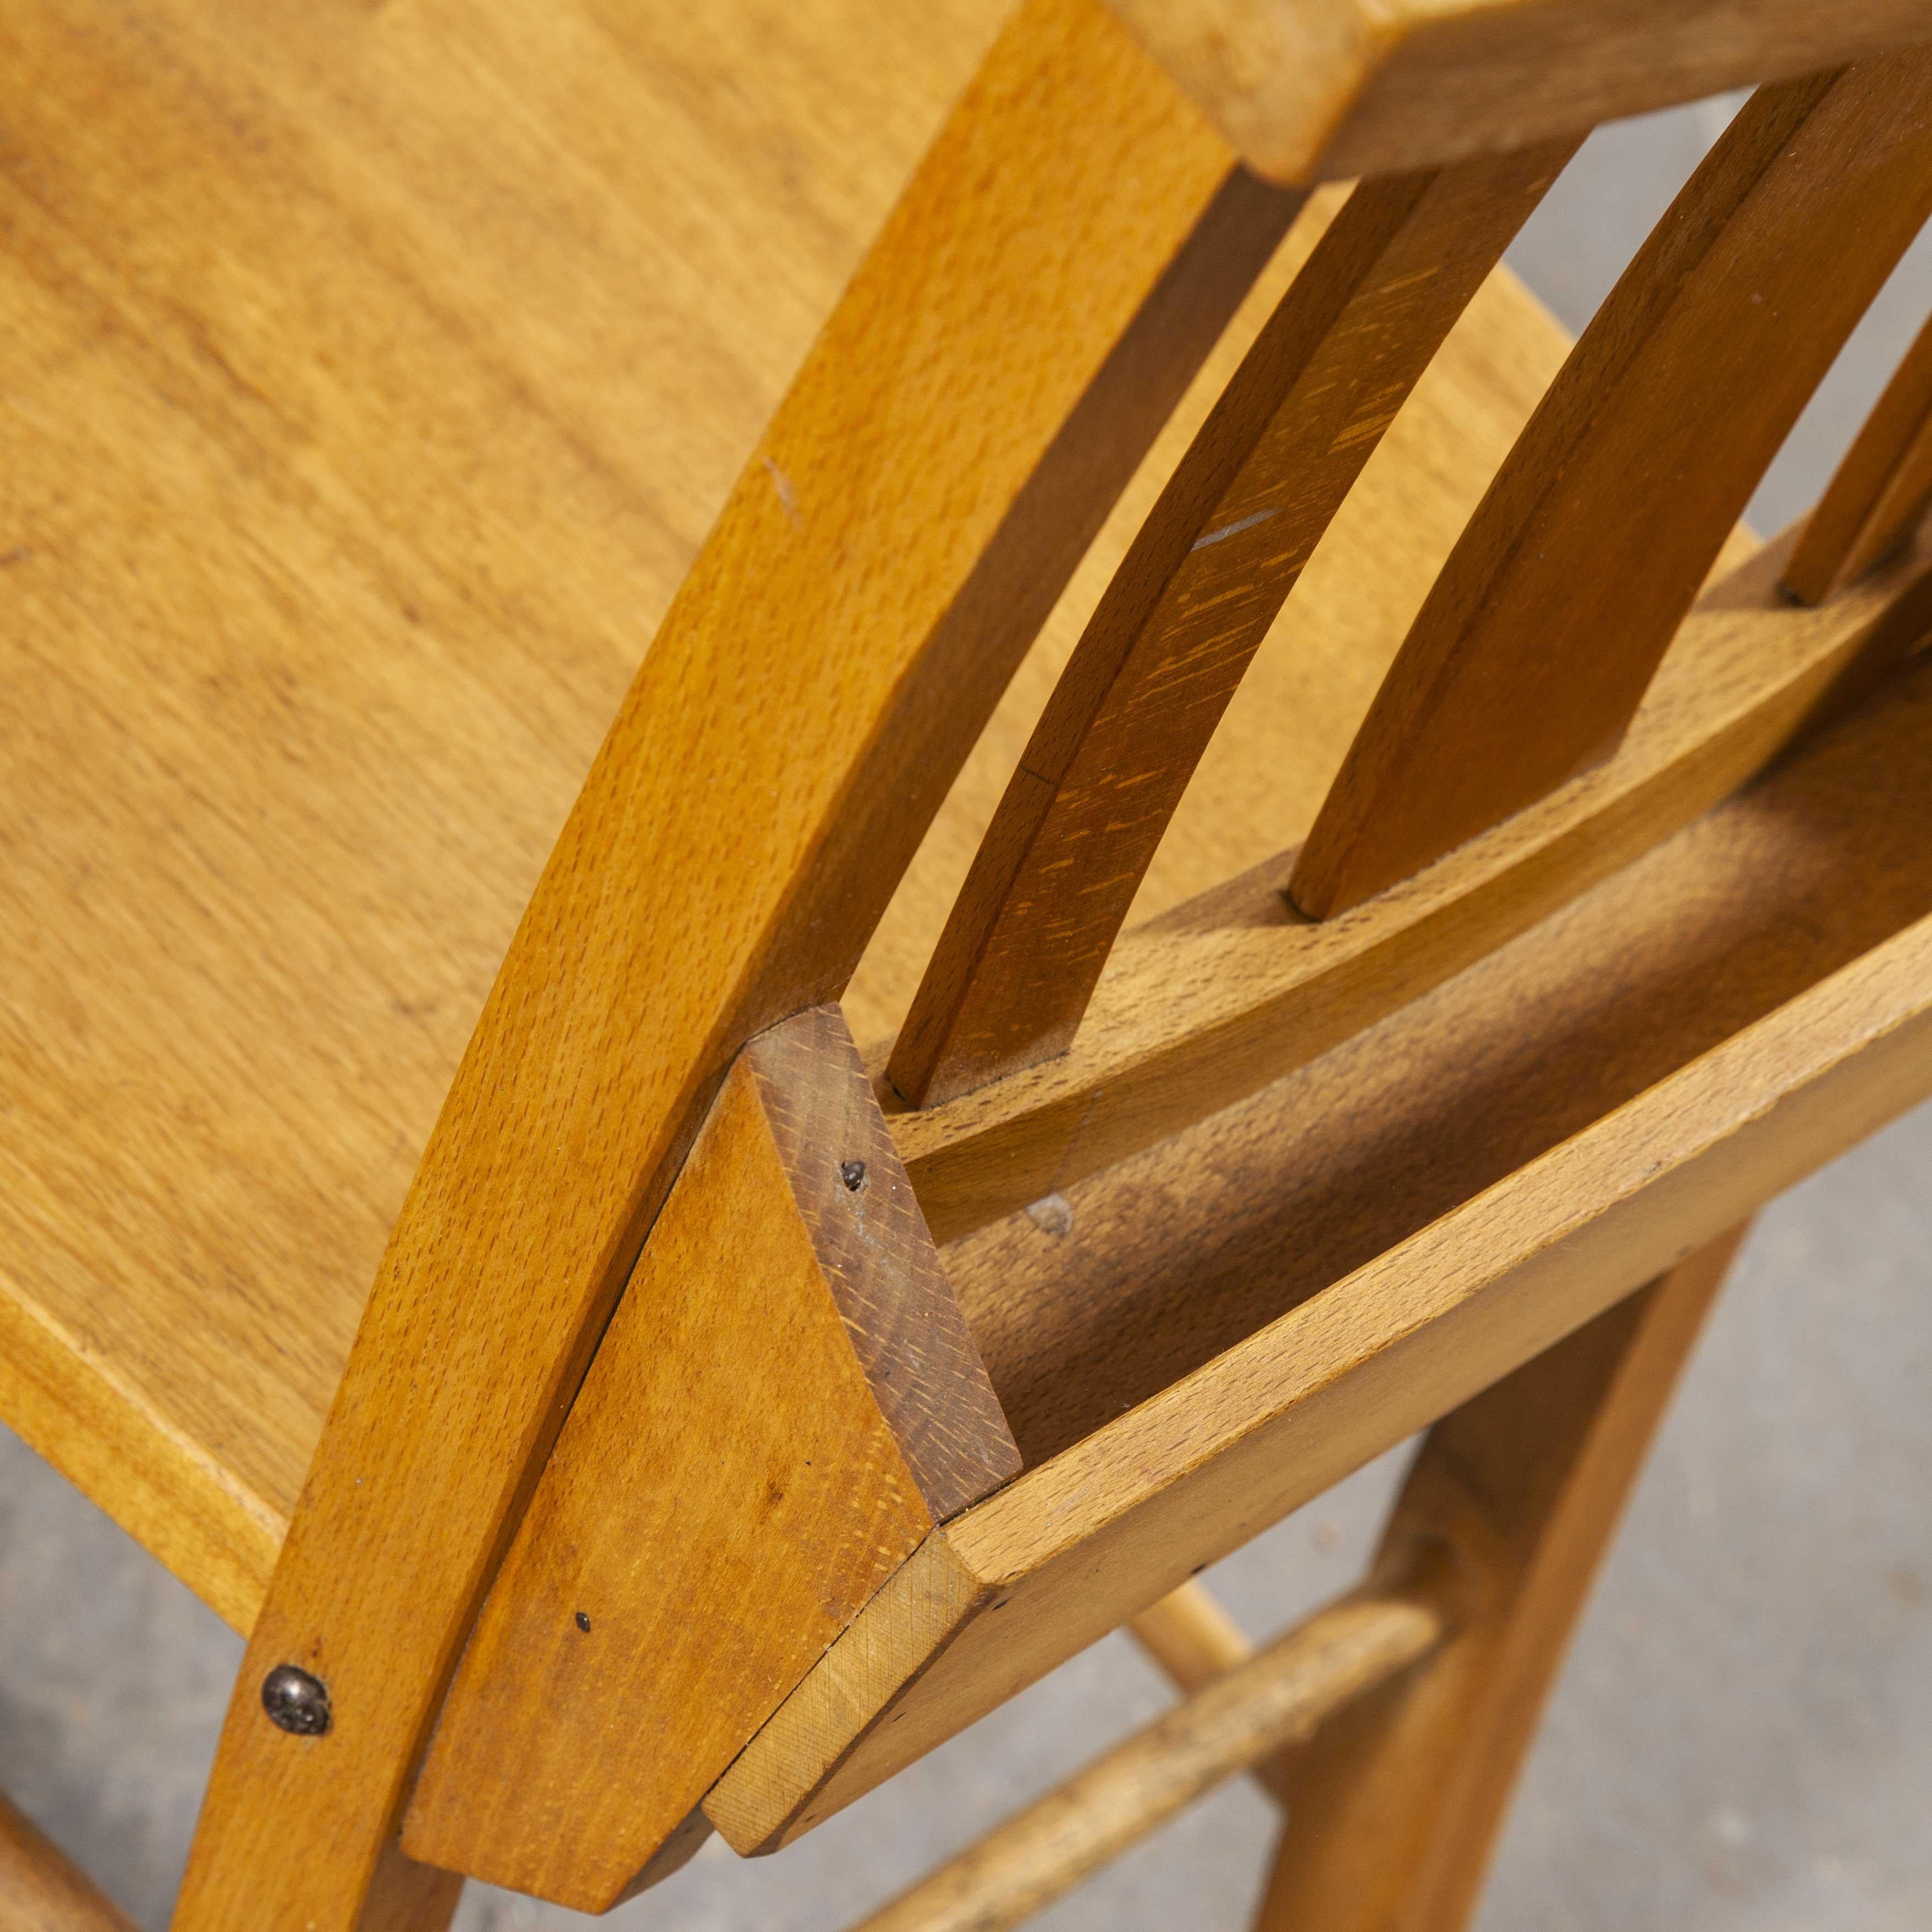 1960s British Beech Church – Chapel dining chairs – Various quantities available. England has a wonderfully rich heritage for making chairs. At the height of production at the turn of the last century over 4500 chairs were being produced daily in